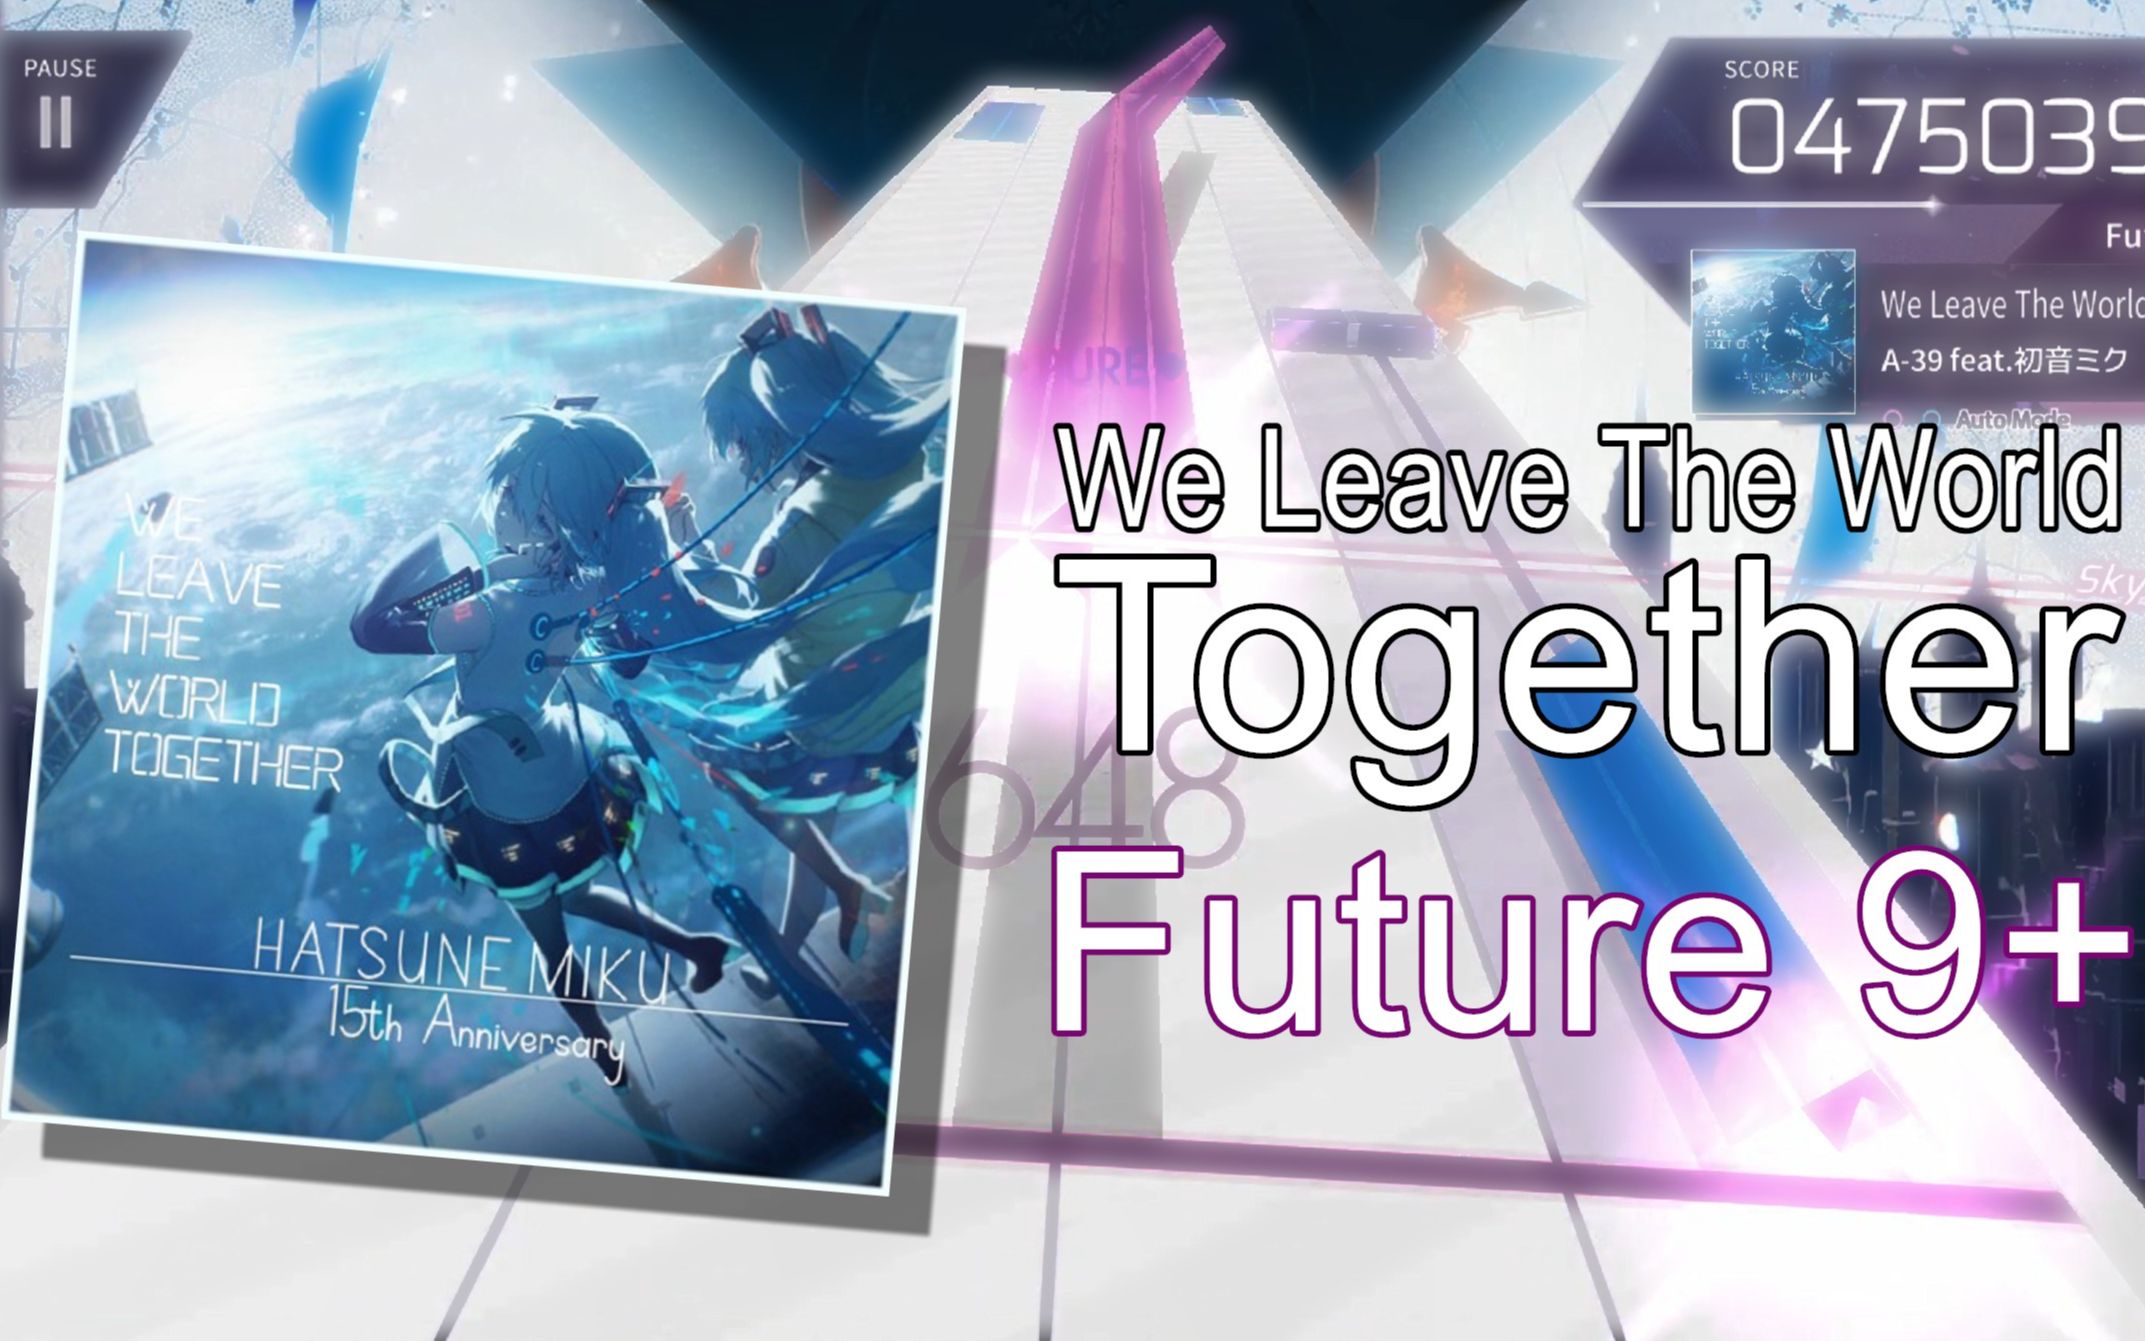 [Arcaea Fanmade] 世界再见 We Leave The World Together / Future 9+